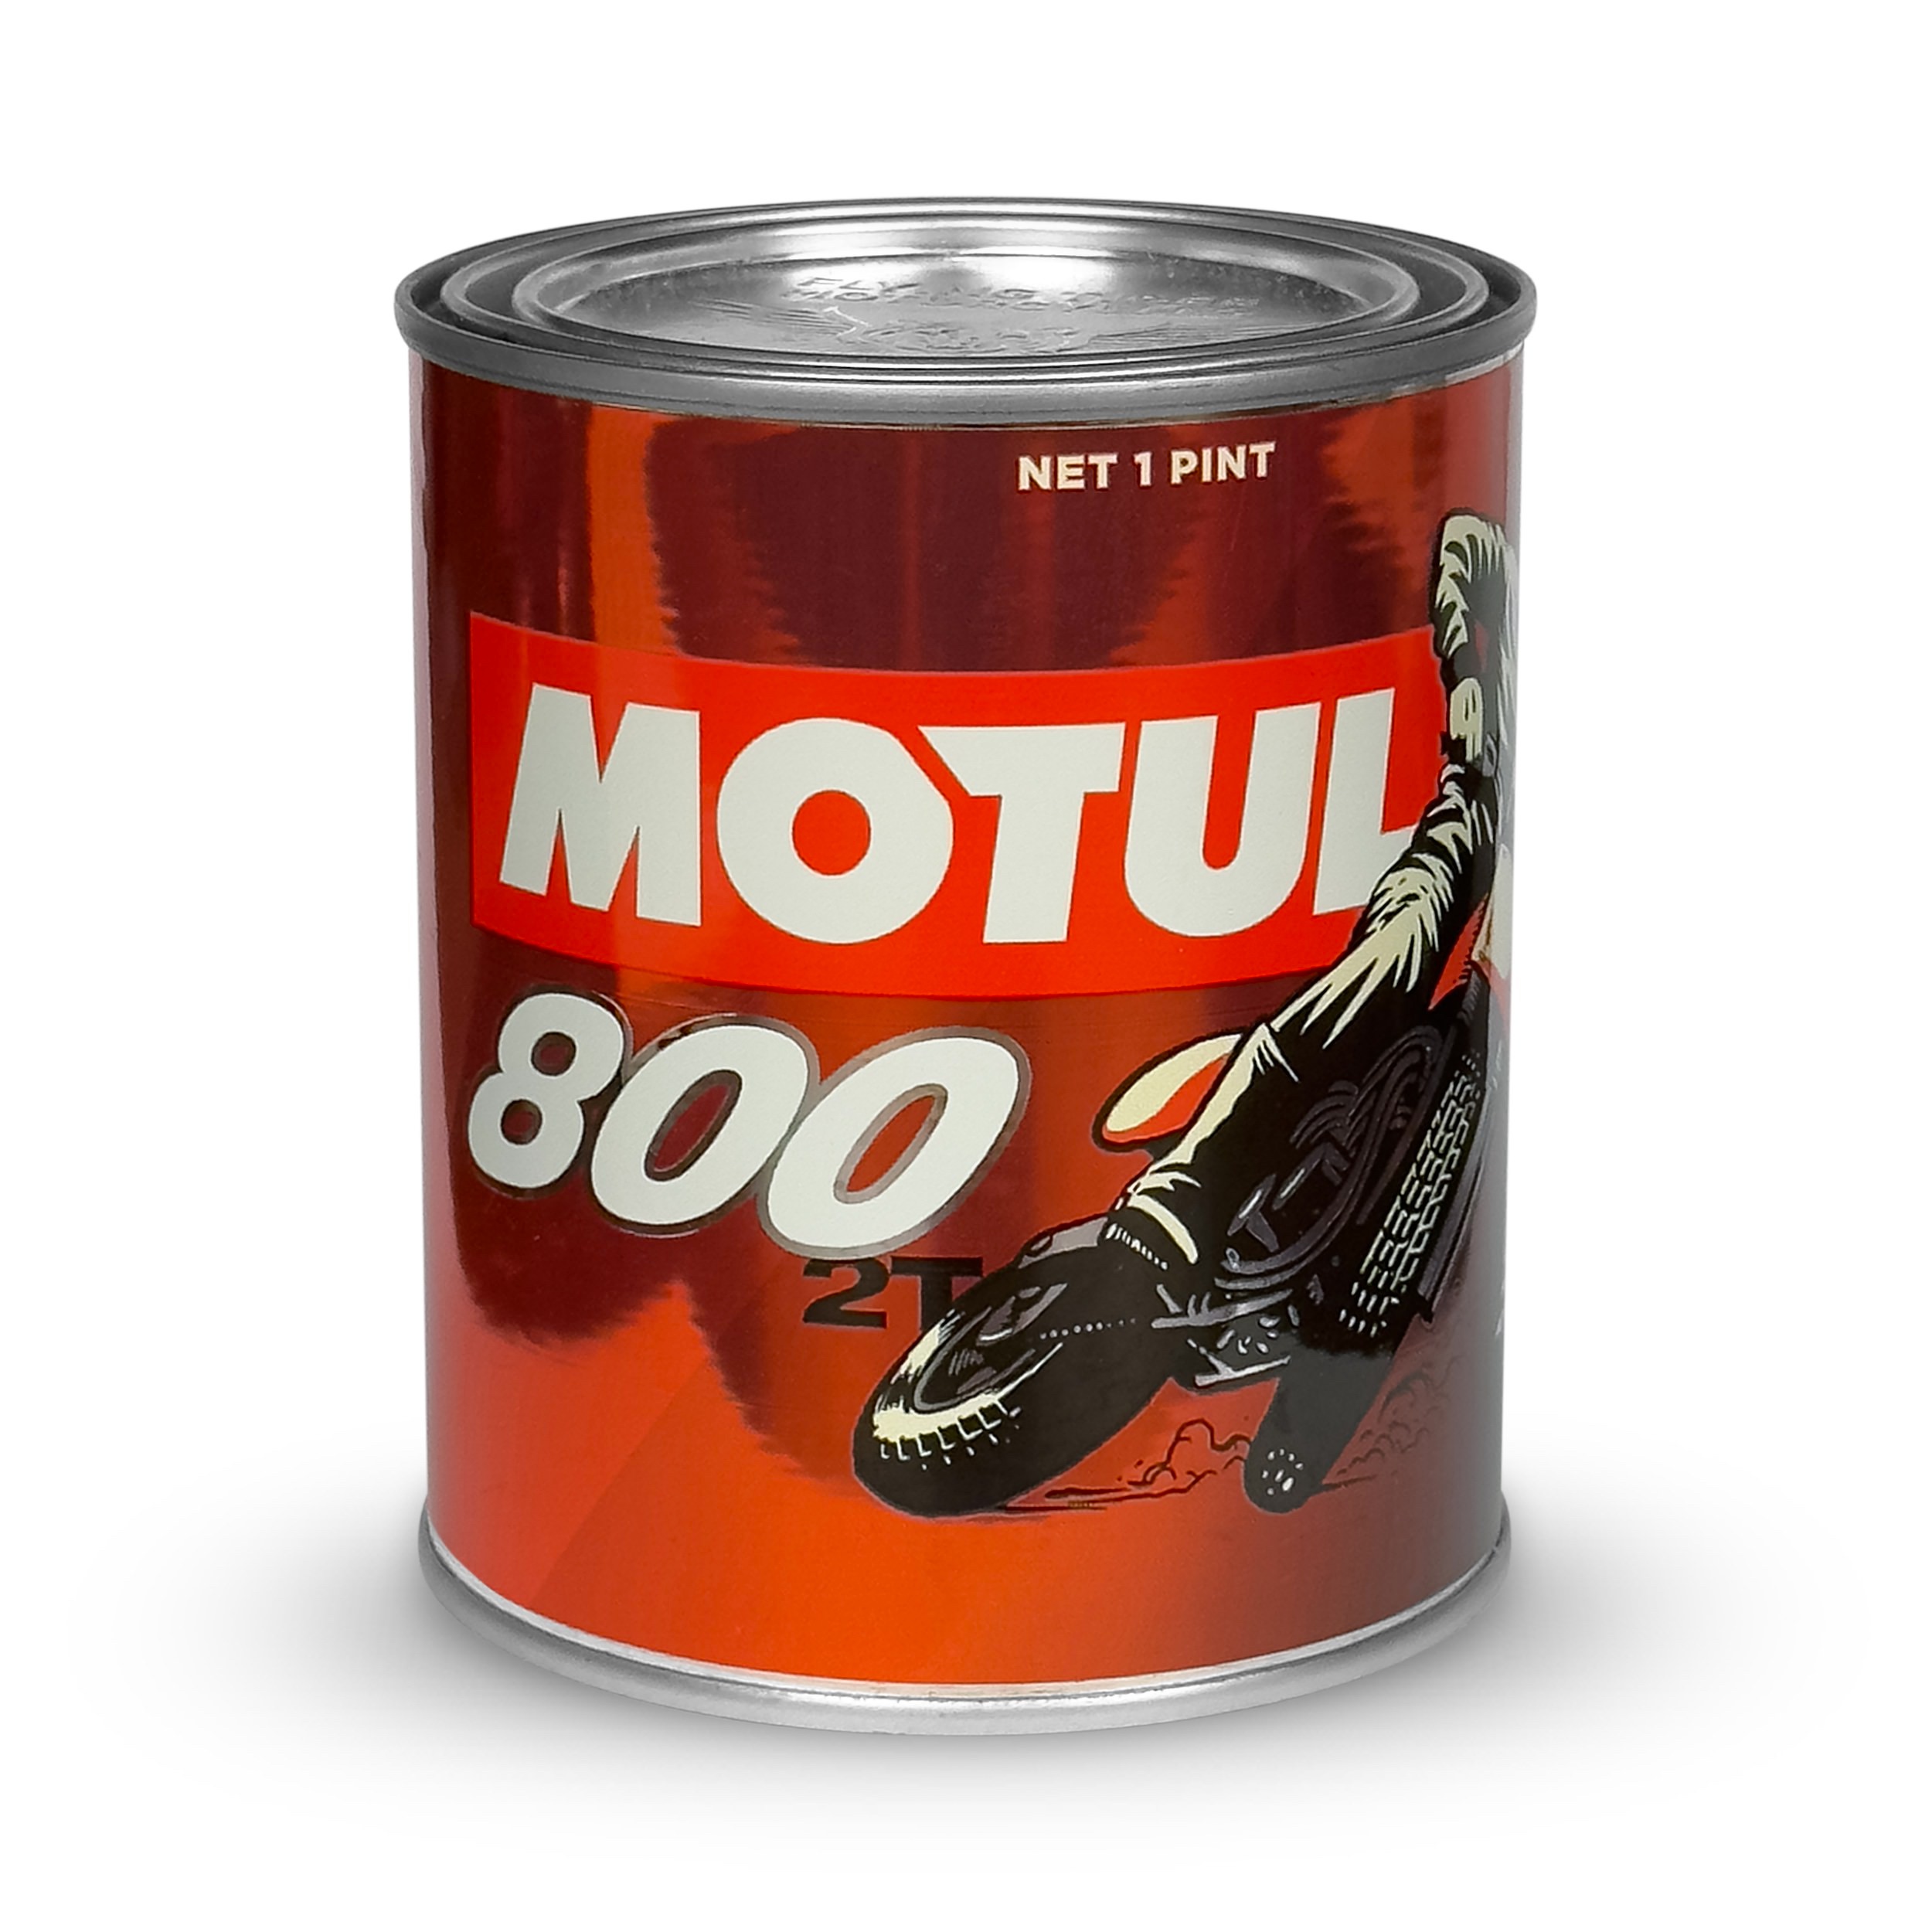 Perfect Christmas Gift: The Motul 800 2T Two Stroke Scented Candle